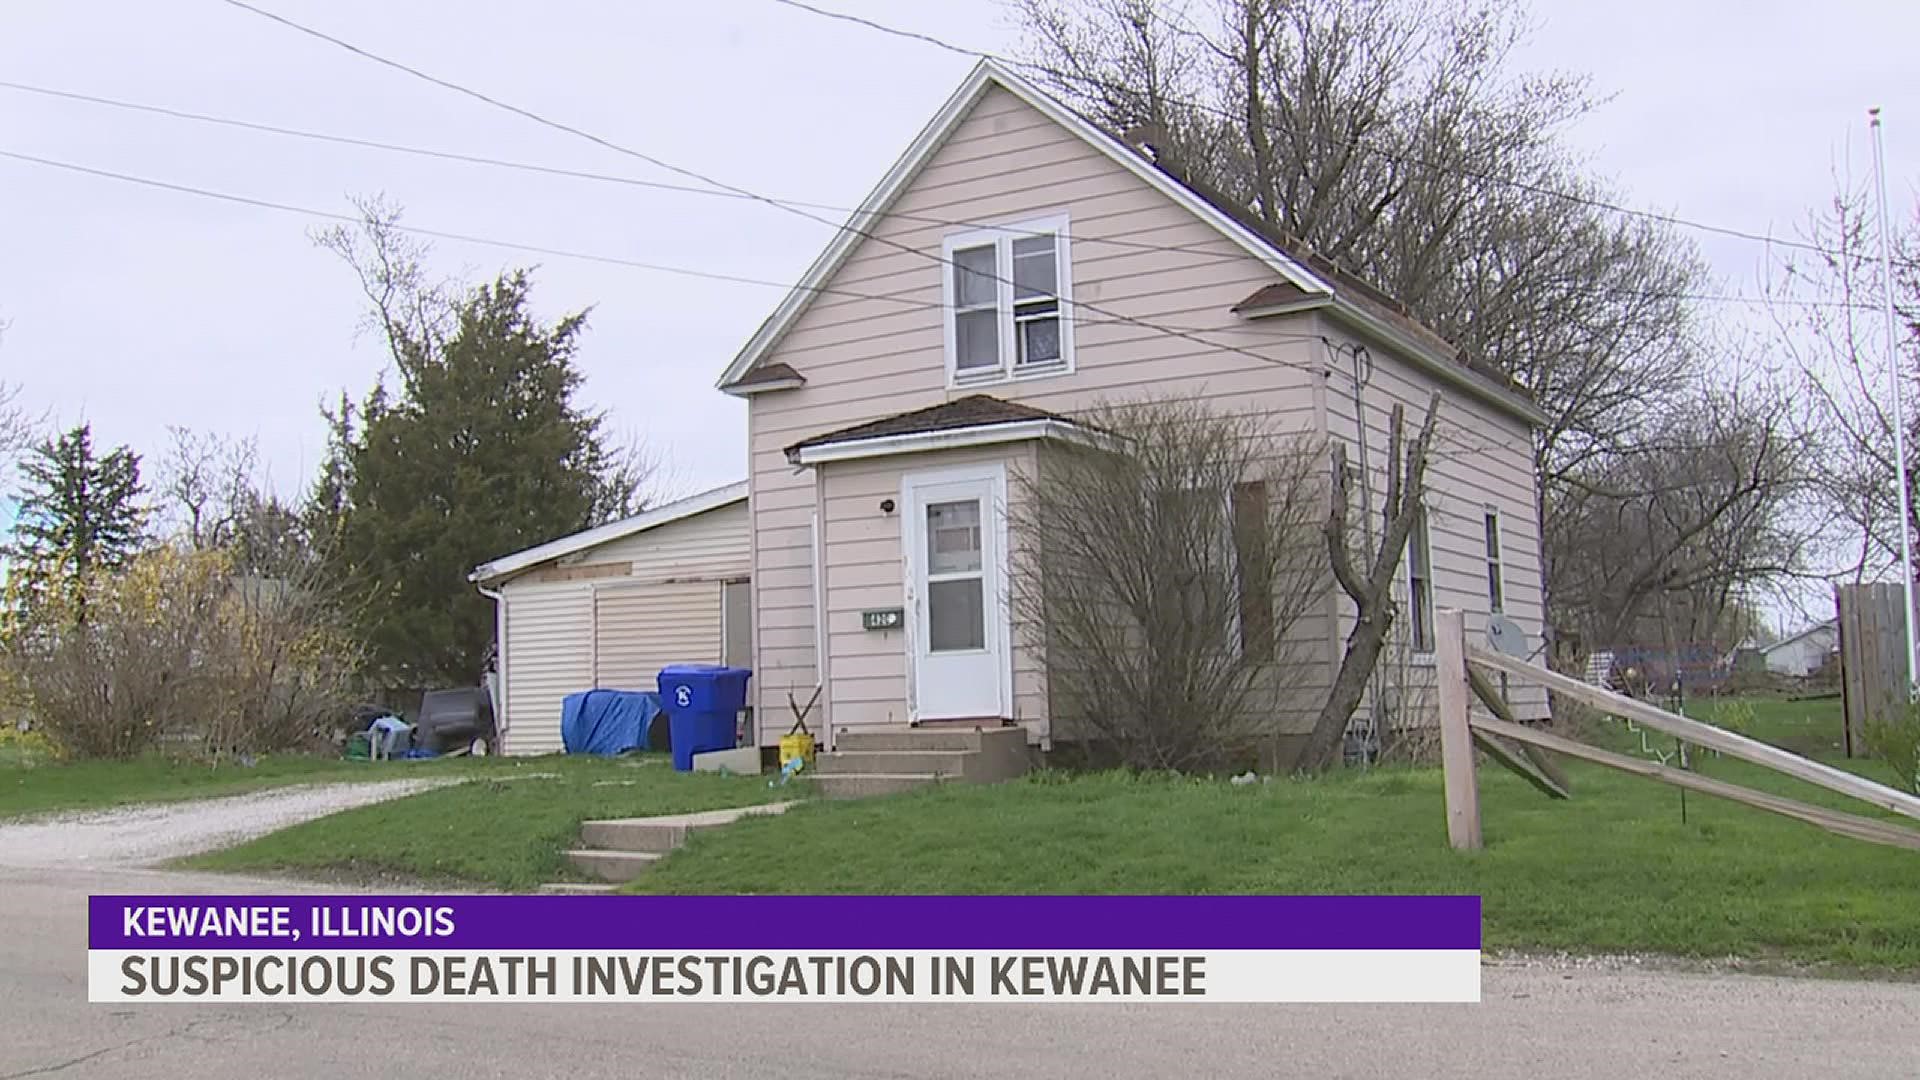 A 23-year-old man was found with a fatal gunshot wound in the 400 block of North Grace Avenue, according to Kewanee Police Department.